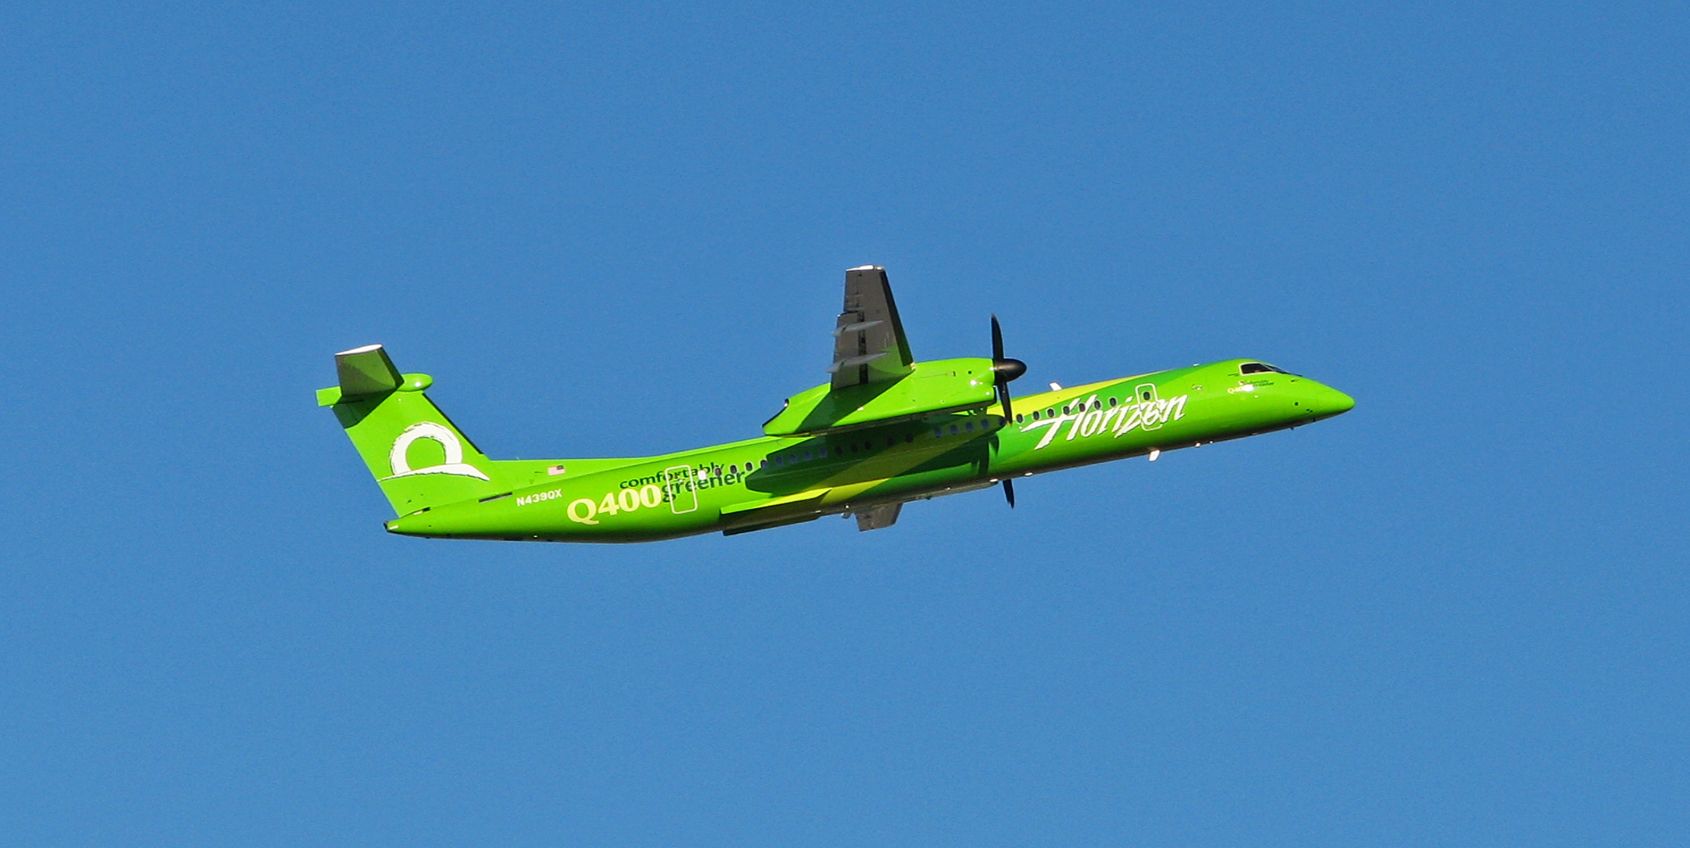 de Havilland Dash 8-400 (N439QX) - This photo, snapped exactly nine years ago today (on Aug 4, 2010) captures QXE's N439QX, which was one of two Horizon Dash 8s wearing the "Comfortably Greener" special livery, as it climbs up into a clear blue sky. A note of historic Horizon Air significance in this photo is the old tail scheme showing the "horizon." In the nine years since this photo was taken, some important changes have occurred at QX: a new livery, titles identifying the parent airline (Alaska) have been added on the fuselage, and new Embraer aircraft have been added to the fleet and are gradually replacing the Dash 8s. One thing; however, has not changed.  N439QX, now dressed in all new garb, is still performing daily revenue runs on QX routes.